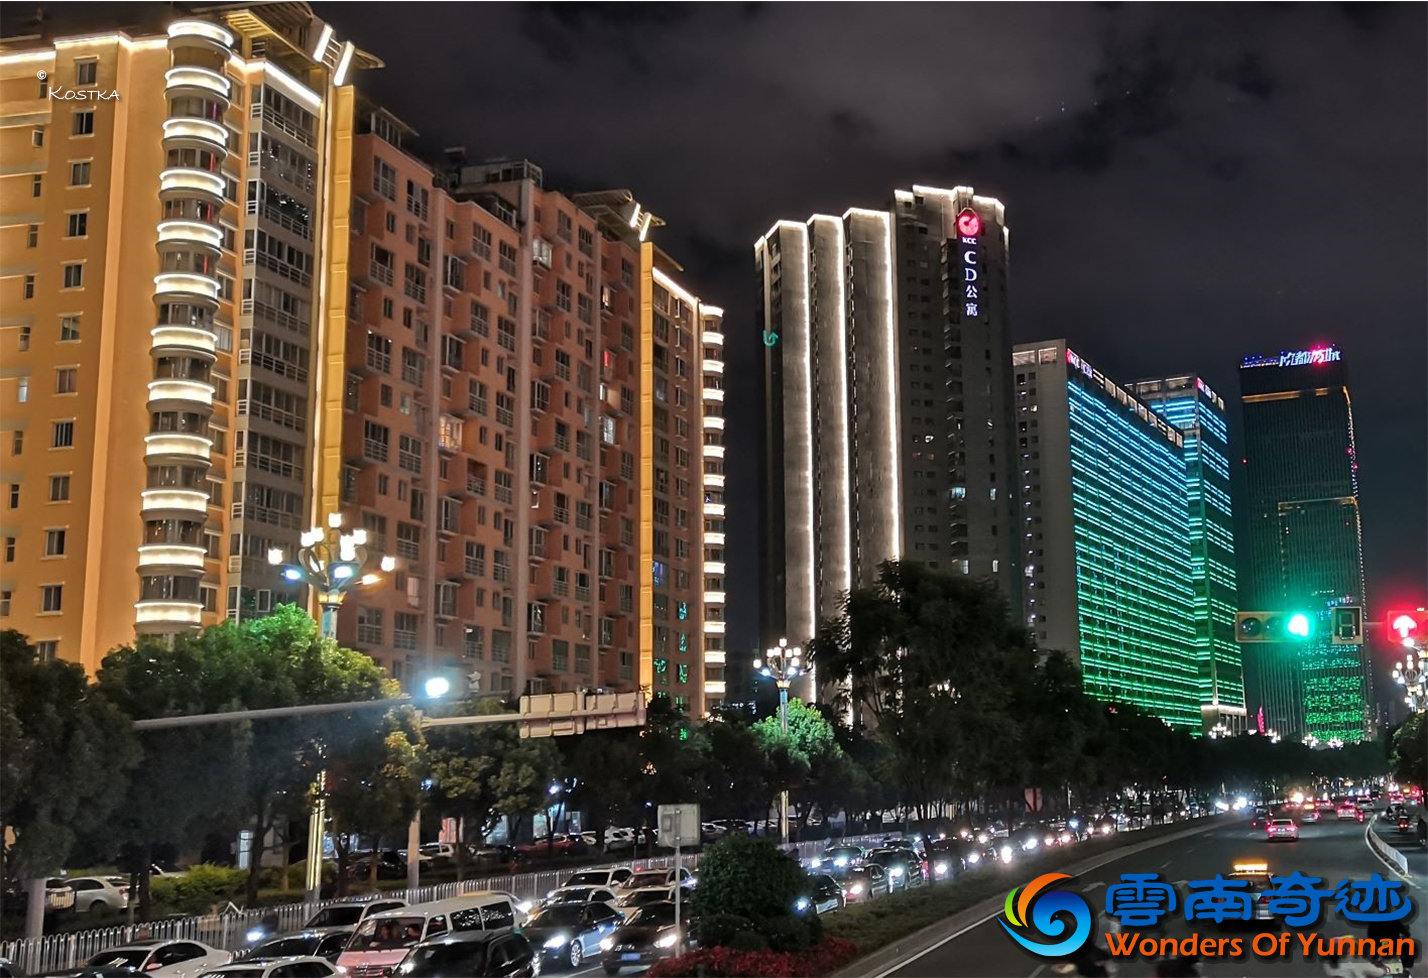 Night vibe at Beijing road (北京路) nearby Beichen 北辰 station with colorful enlightened buildings and cars stuck in traffic jam direction outside of the city